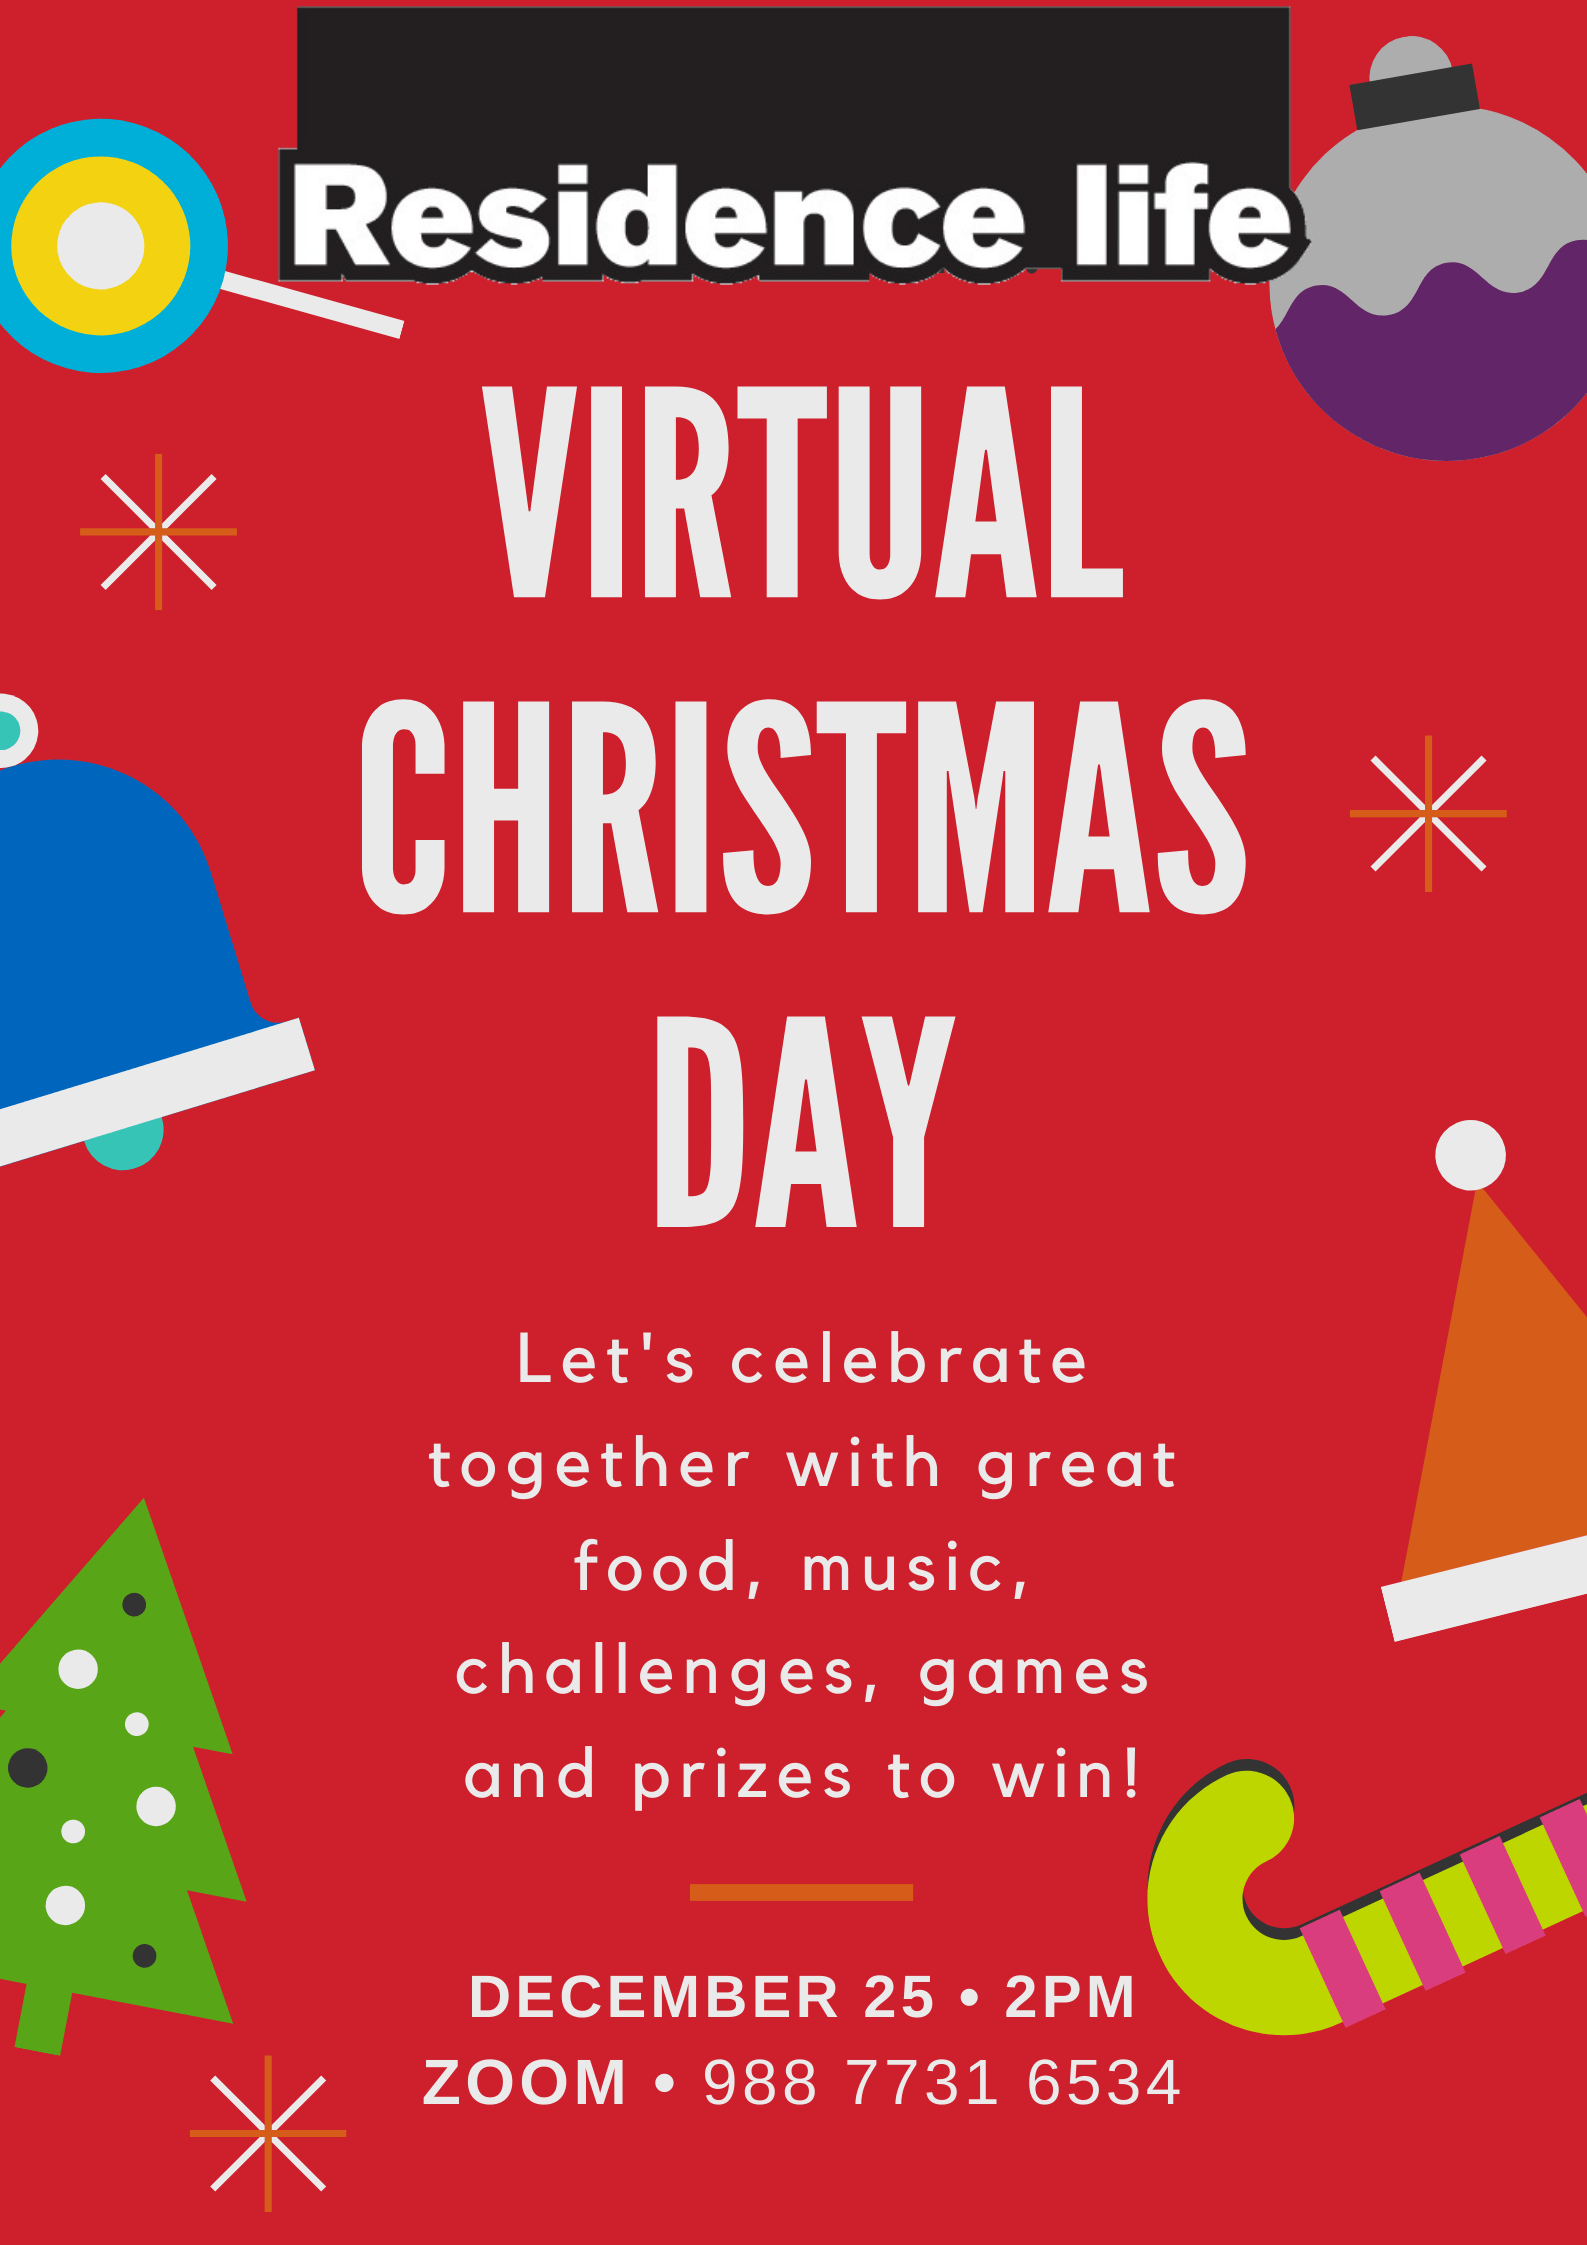 A poster displaying event information for a Residence Life activity. Join us on Zoom on Christmas Day using Zoom Meeting ID 98877316534 to celebrate together virtually with food, music, games, challenges, and prizes to be won. 